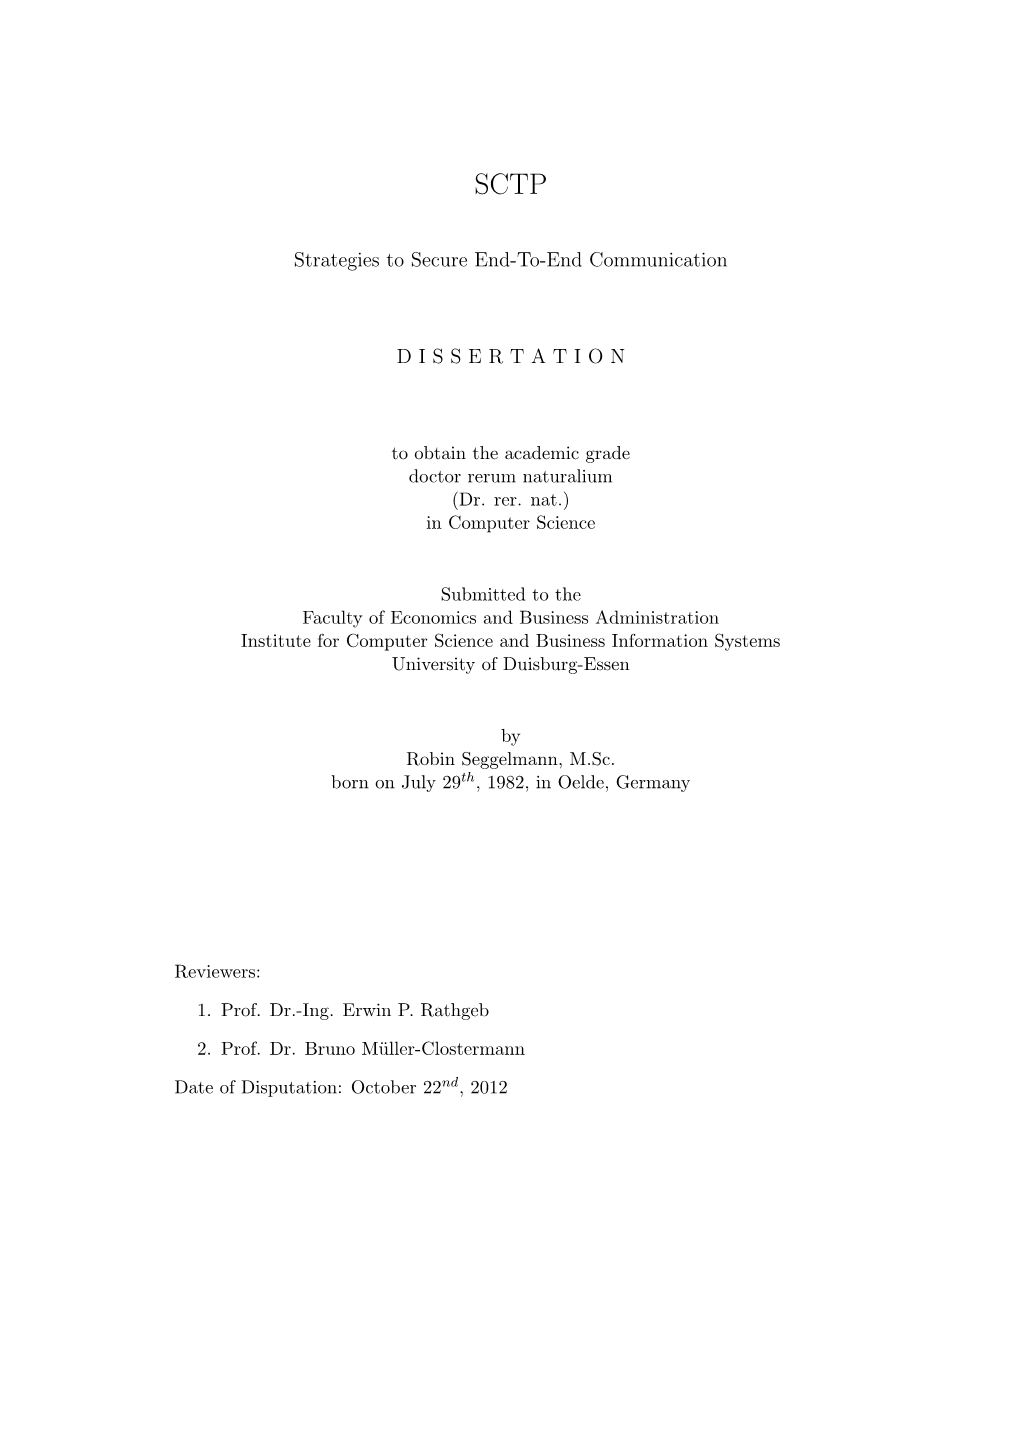 Strategies to Secure End-To-End Communication DISSERTATION